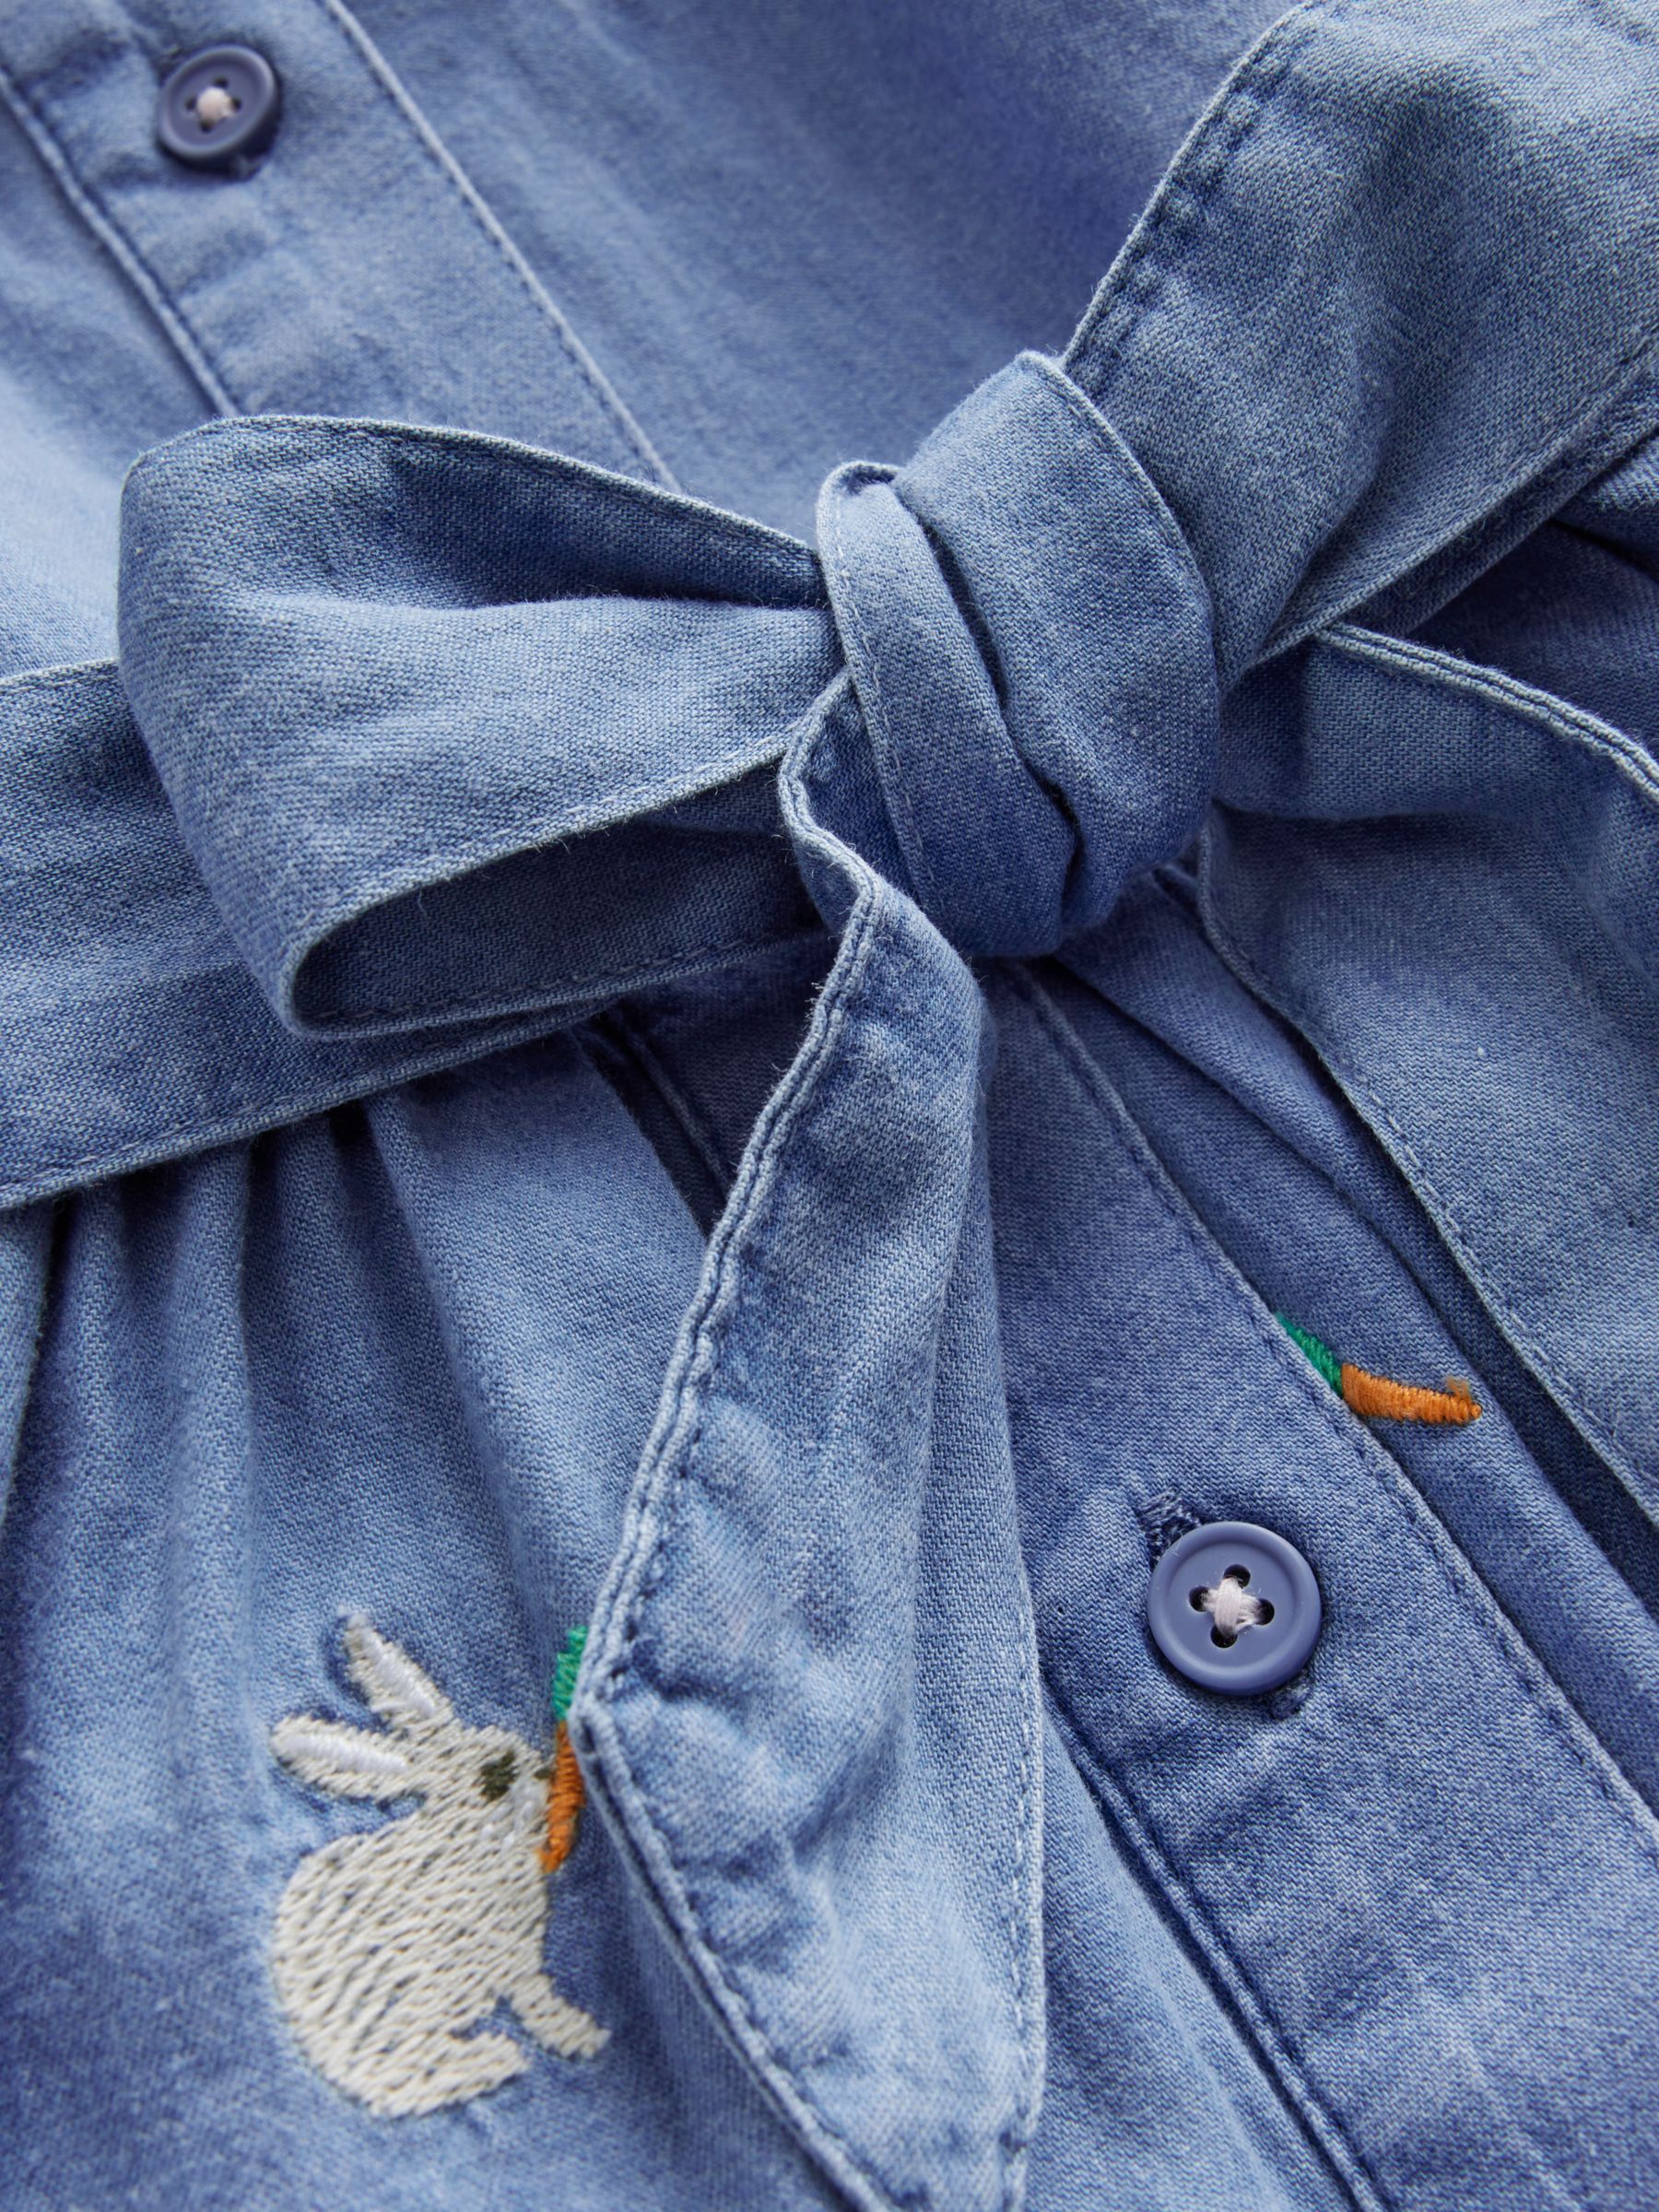 Buy Mini Boden Kids' Embroidered Bunnies Shirt Dress, Blue Chambray Online at johnlewis.com